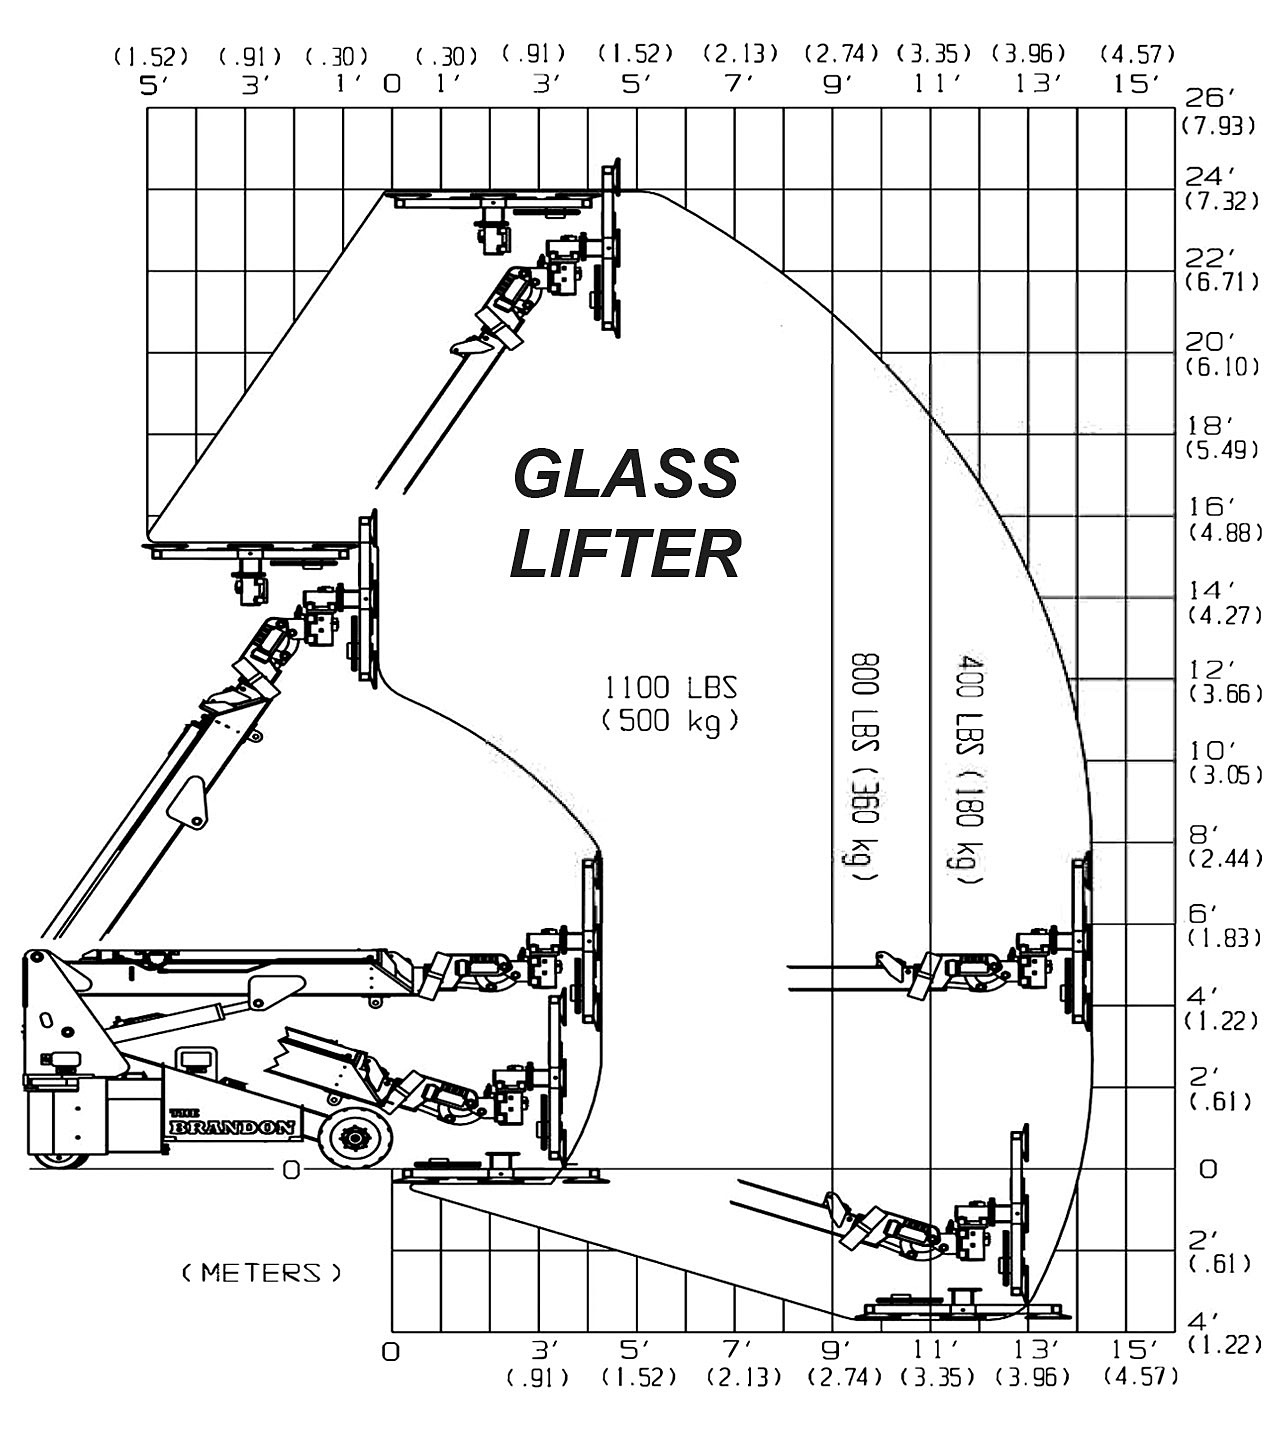 The Brandon Electric Glass Lifter Load Capacity